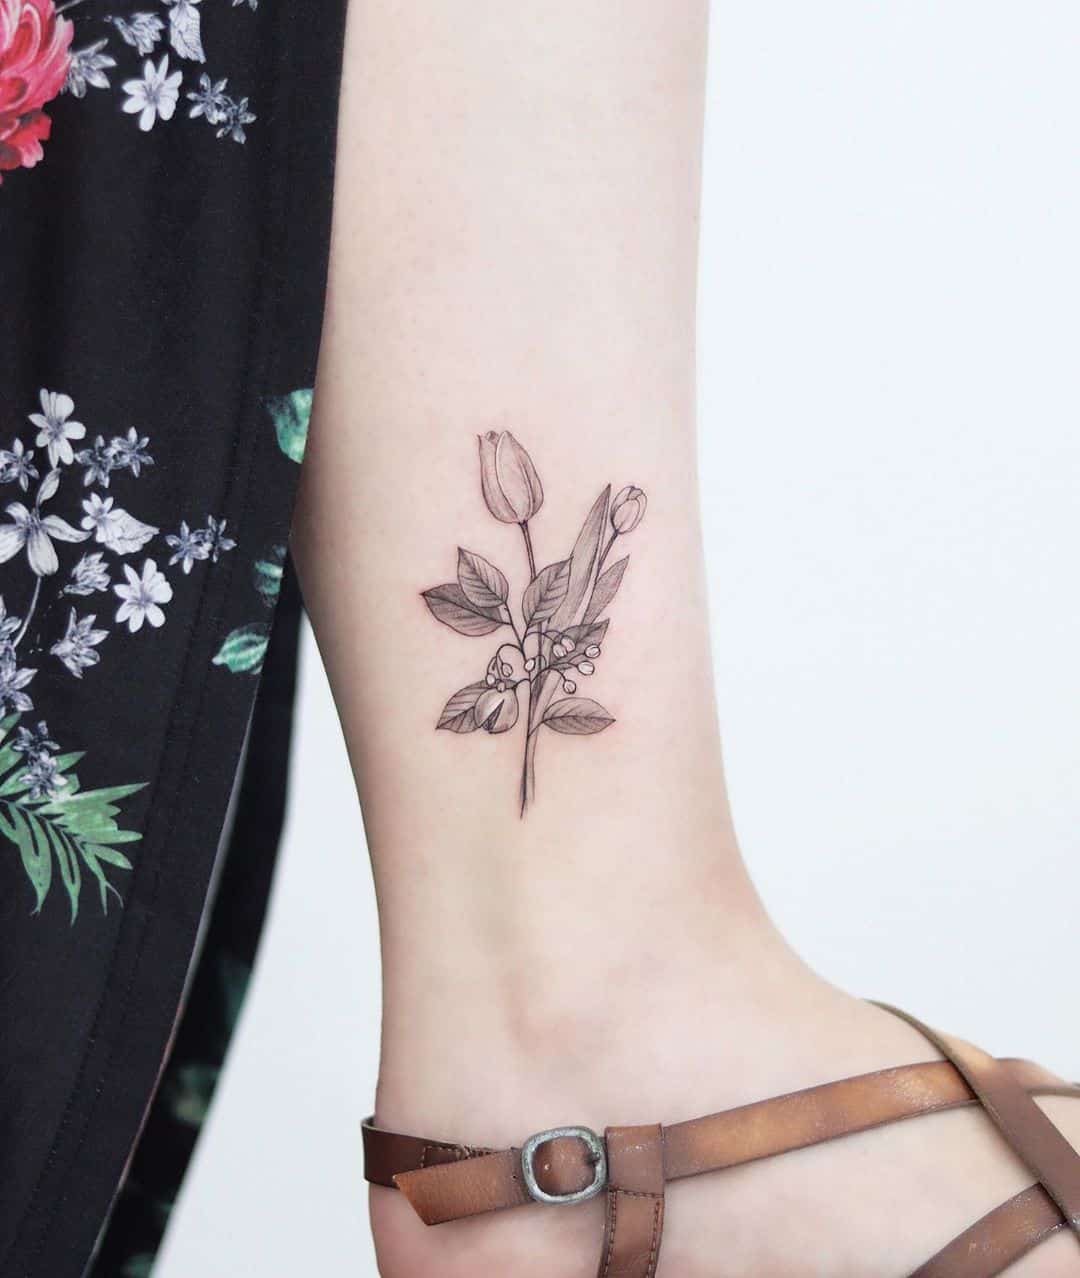 Amazing floral tattoo on ankle4